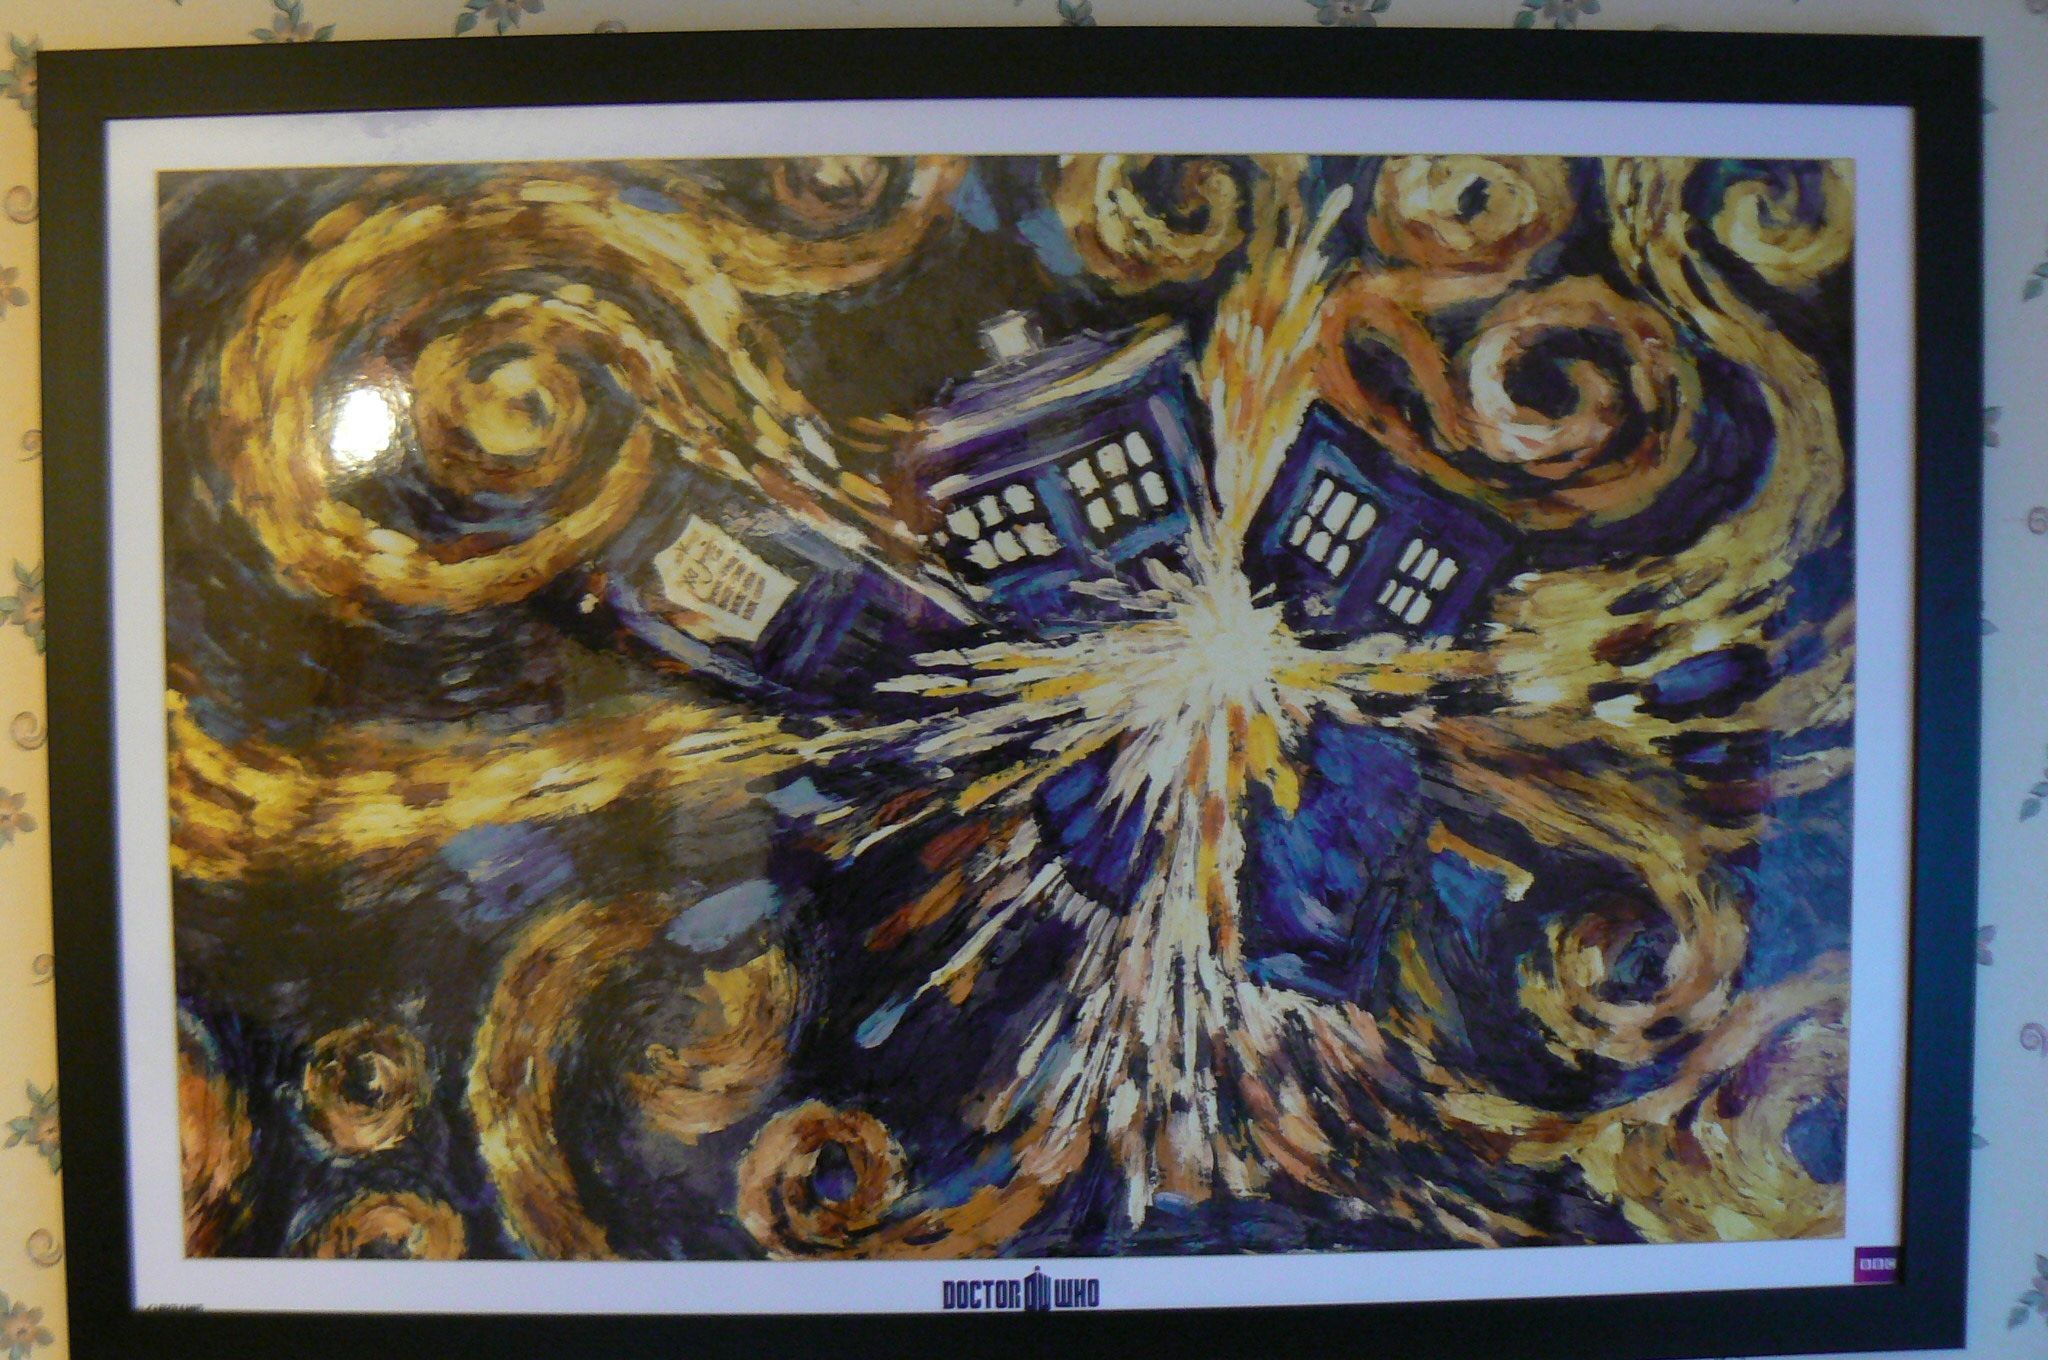 2048x1360 Van Gogh Tardis Doctor Who Images & Pictures - Becuo